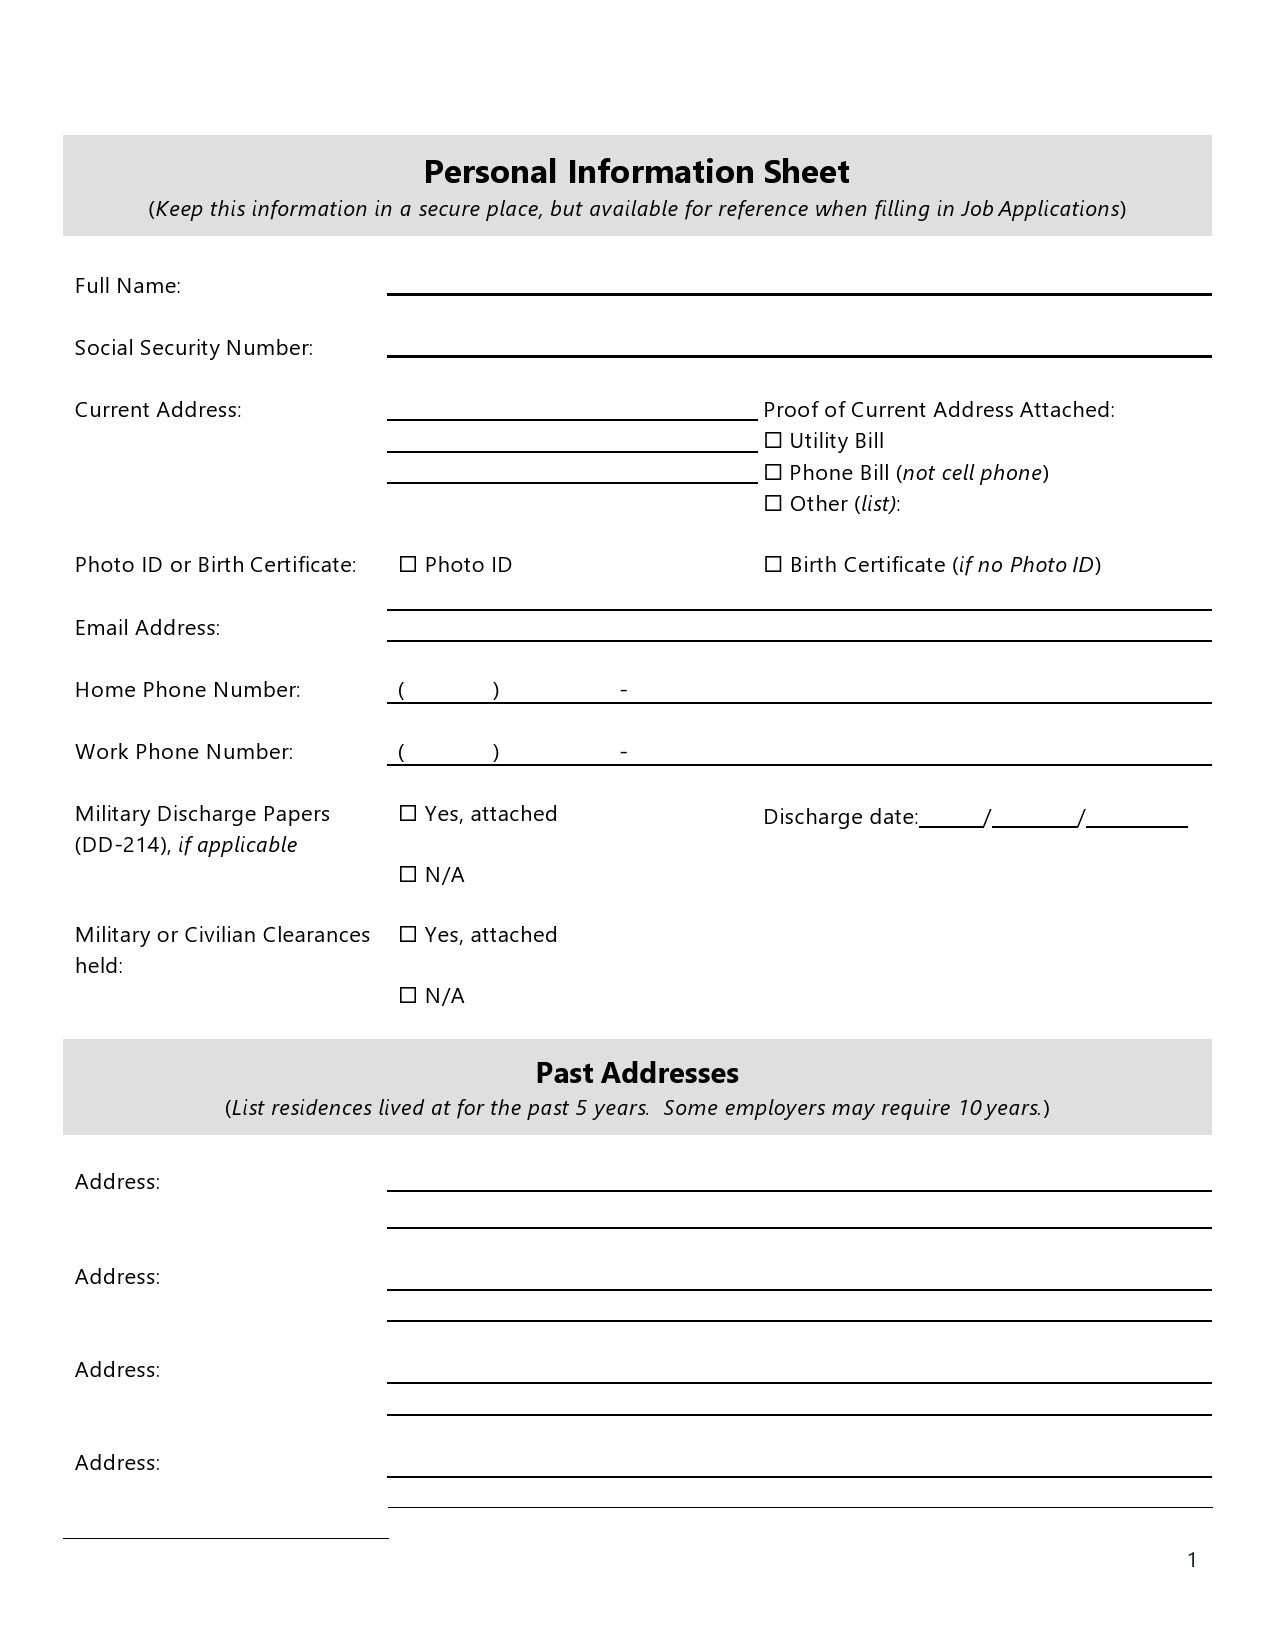 Free personal information form 37